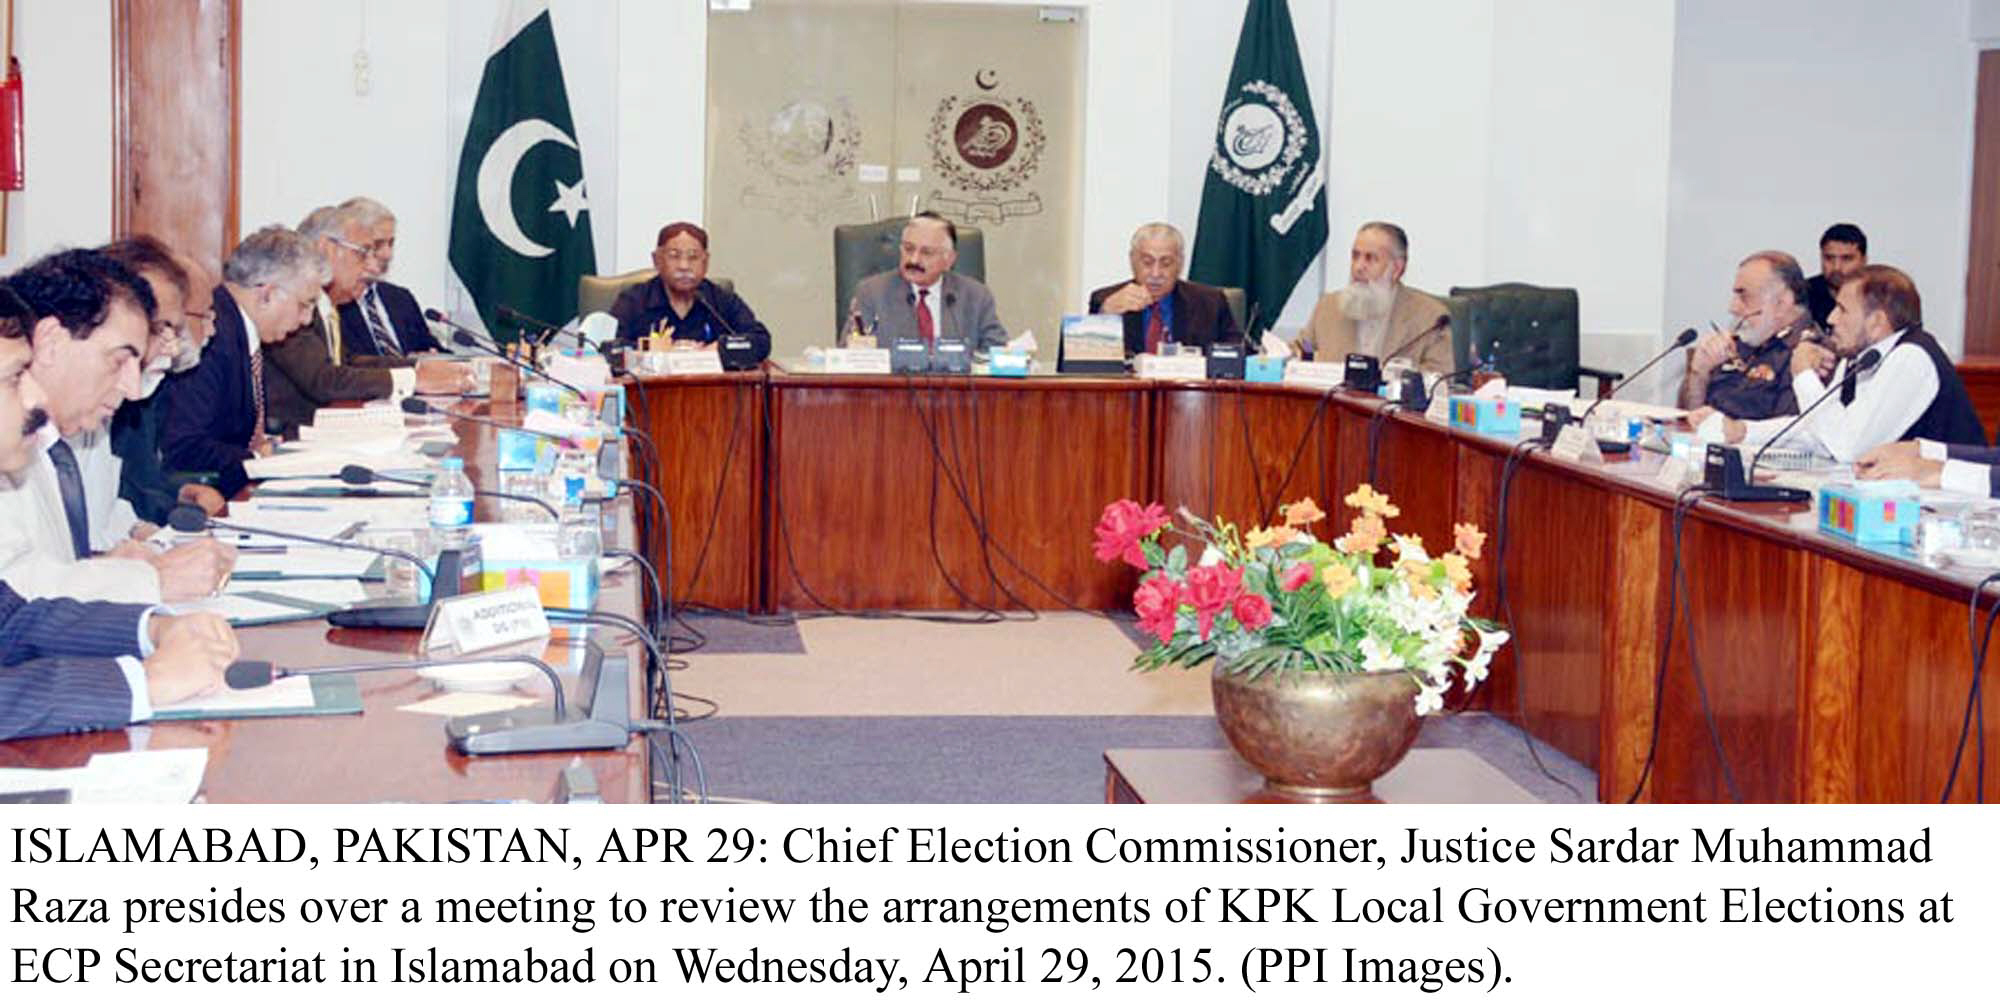 chief election commissioner justice sardar muhammad raza chairs a meeting of the ecp on wednesday photo ppi